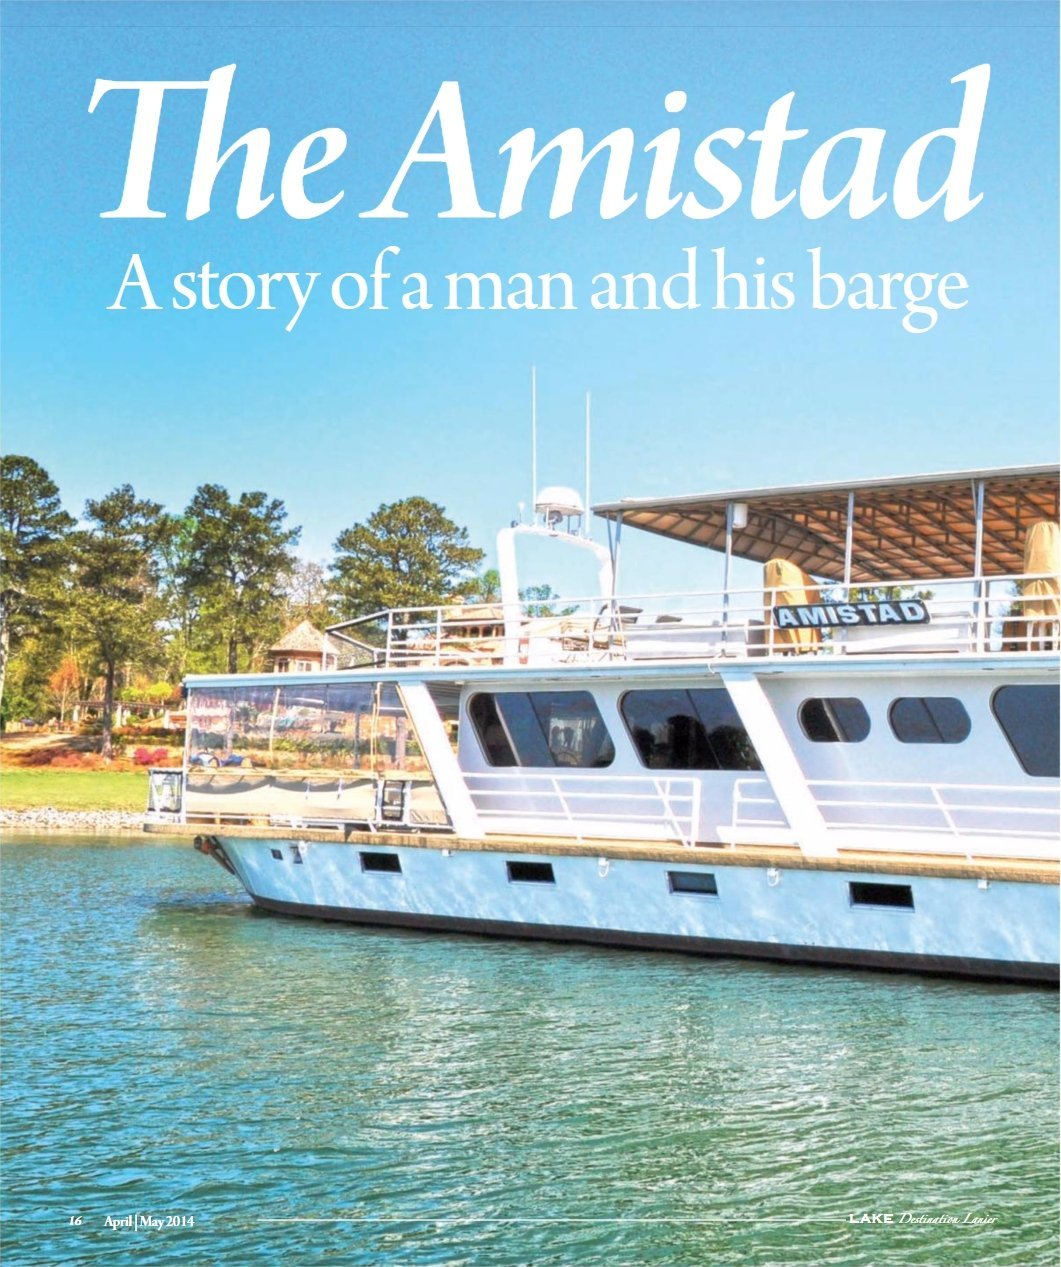 yacht Amistad (propriétaire Tommy Bagwell)